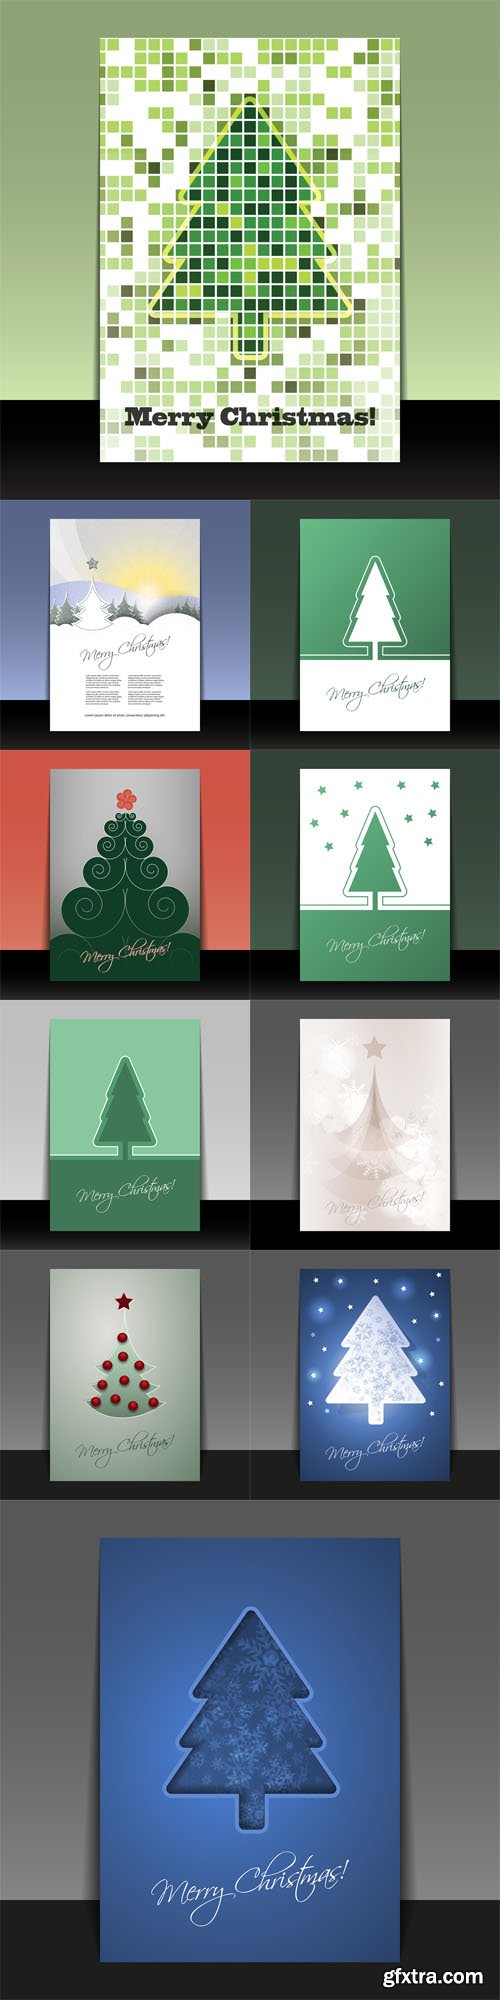 10 Vector Christmas Flyer or Cover Design